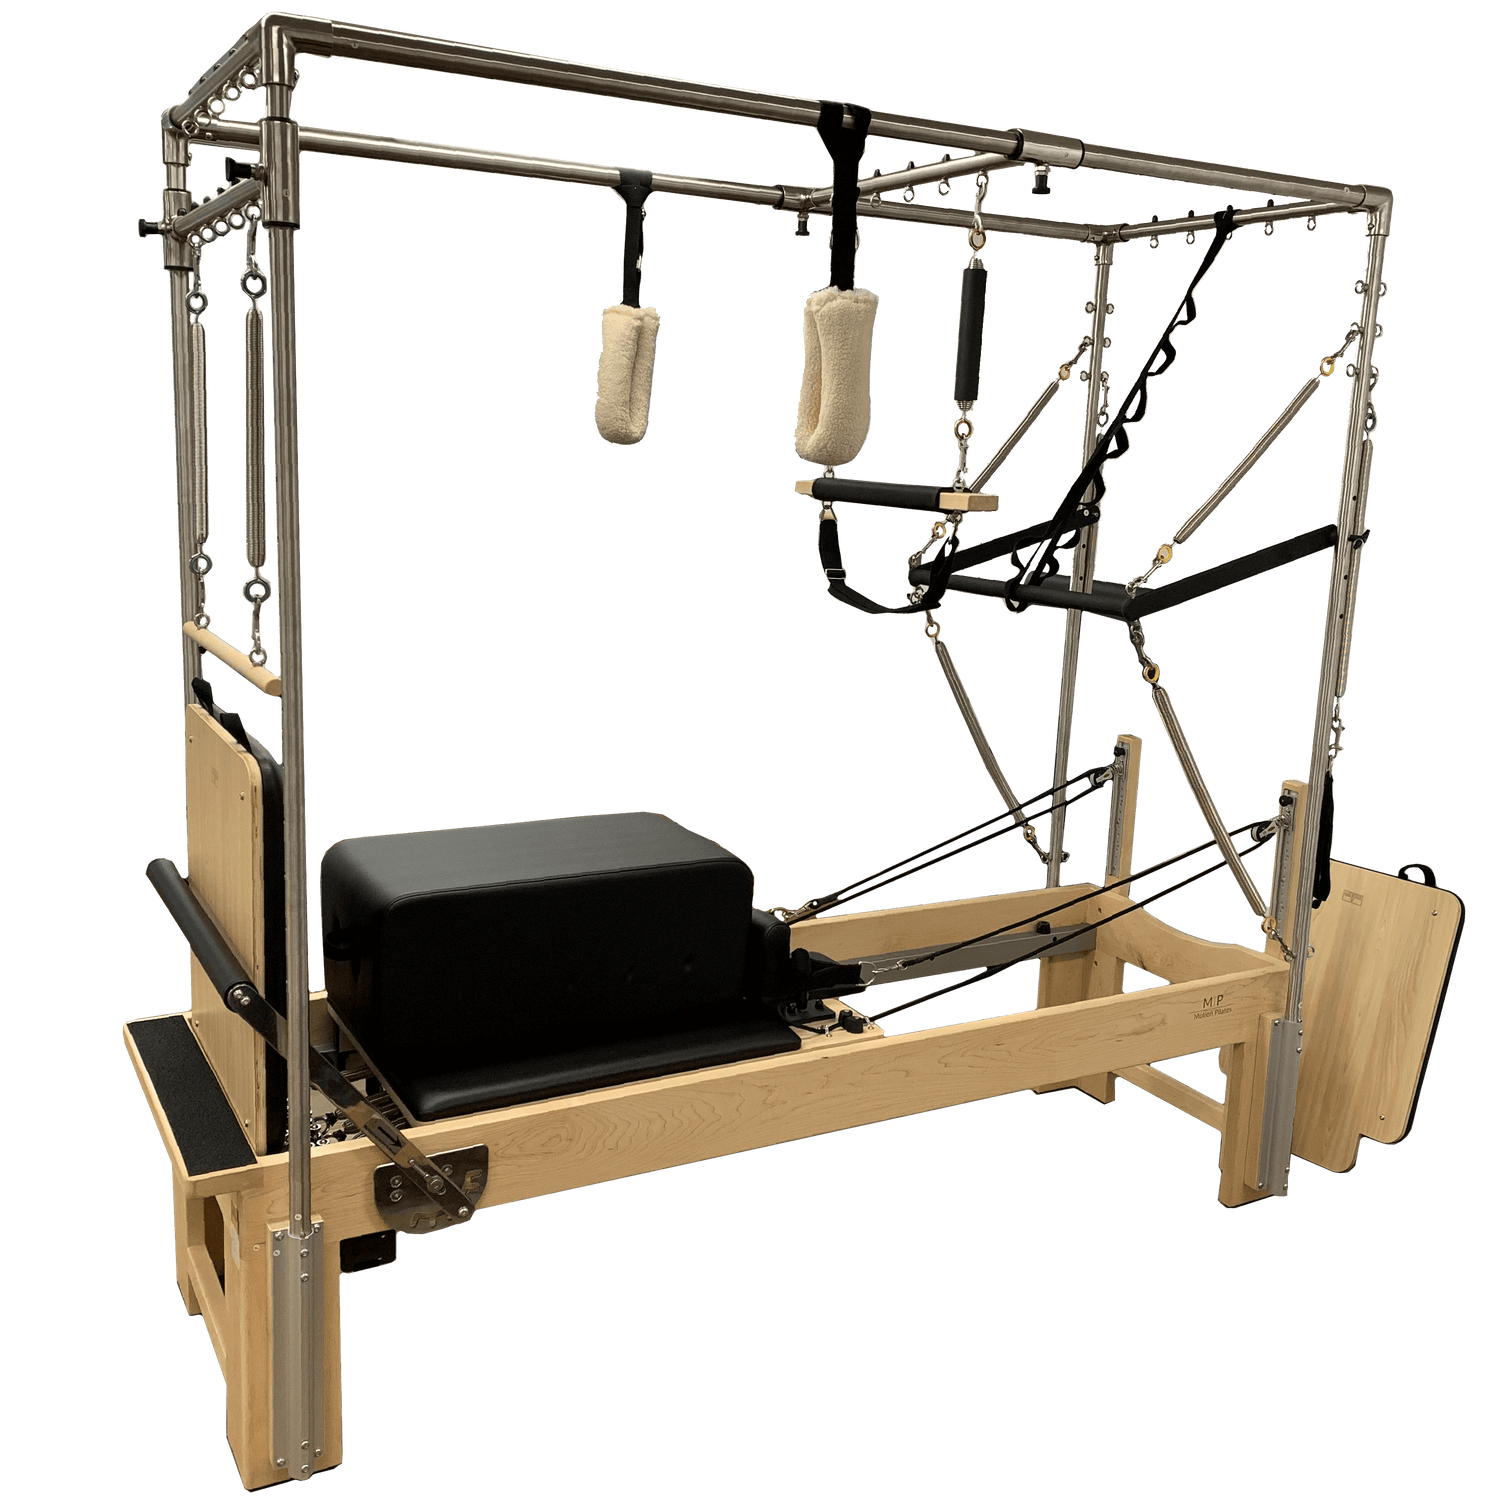 Buy Trapeze Pilates Reformers Online - Motion Pilates Full Trapeze Package